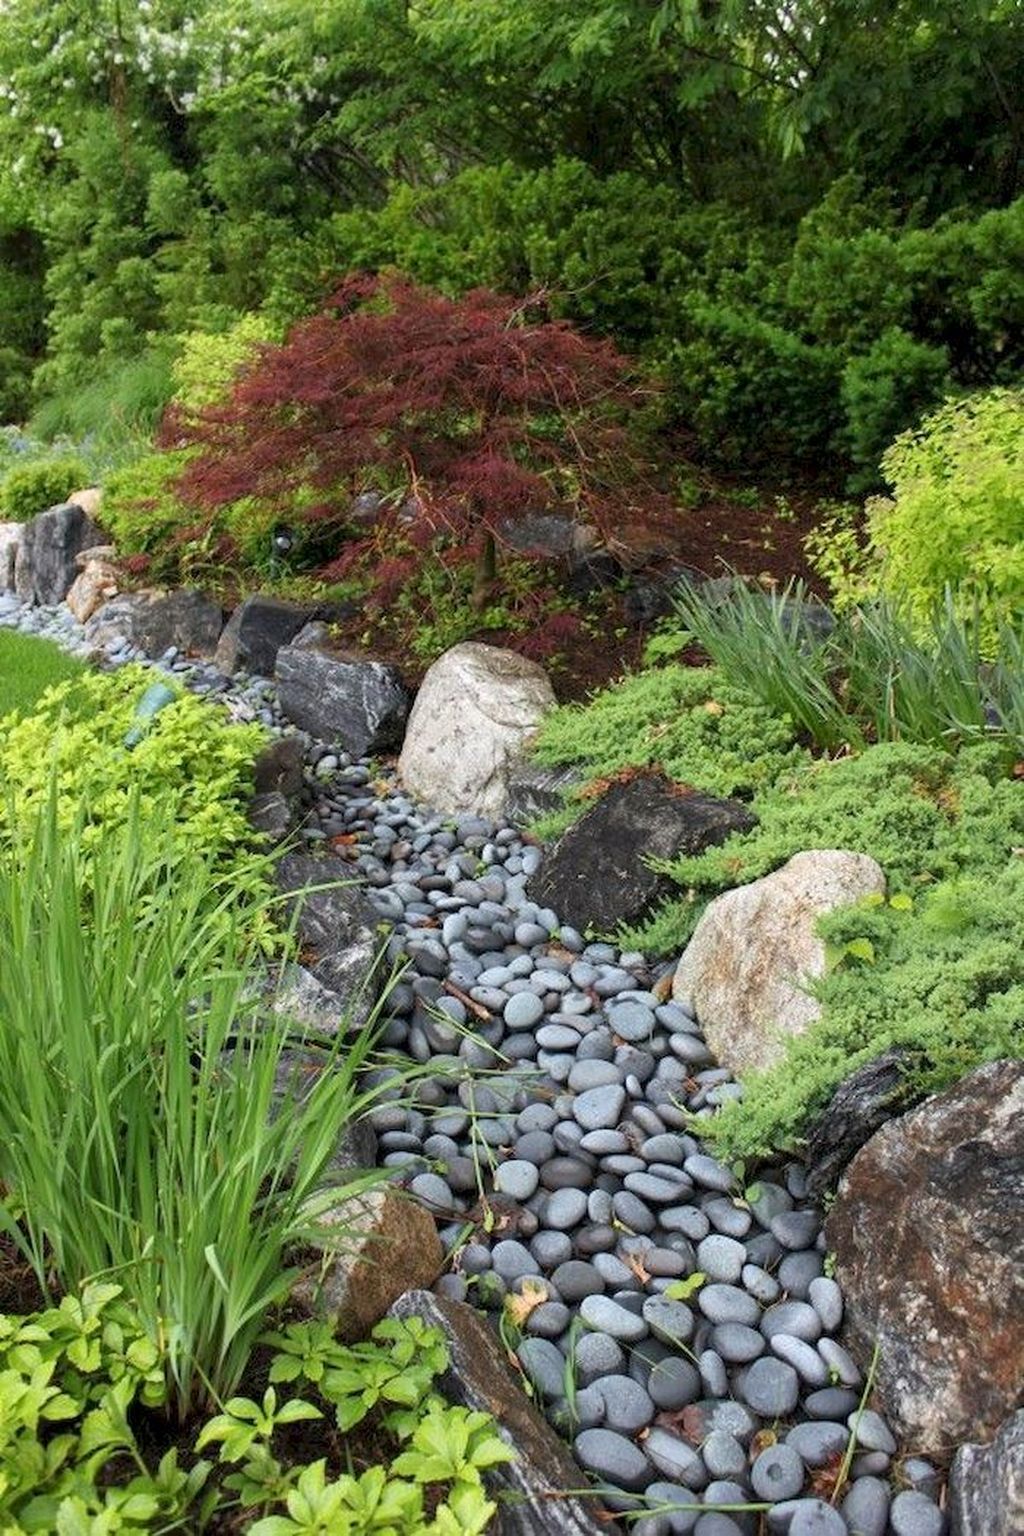 34 Awesome River Rock Landscaping Ideas - Awesome River Rock LanDscaping IDeas 11